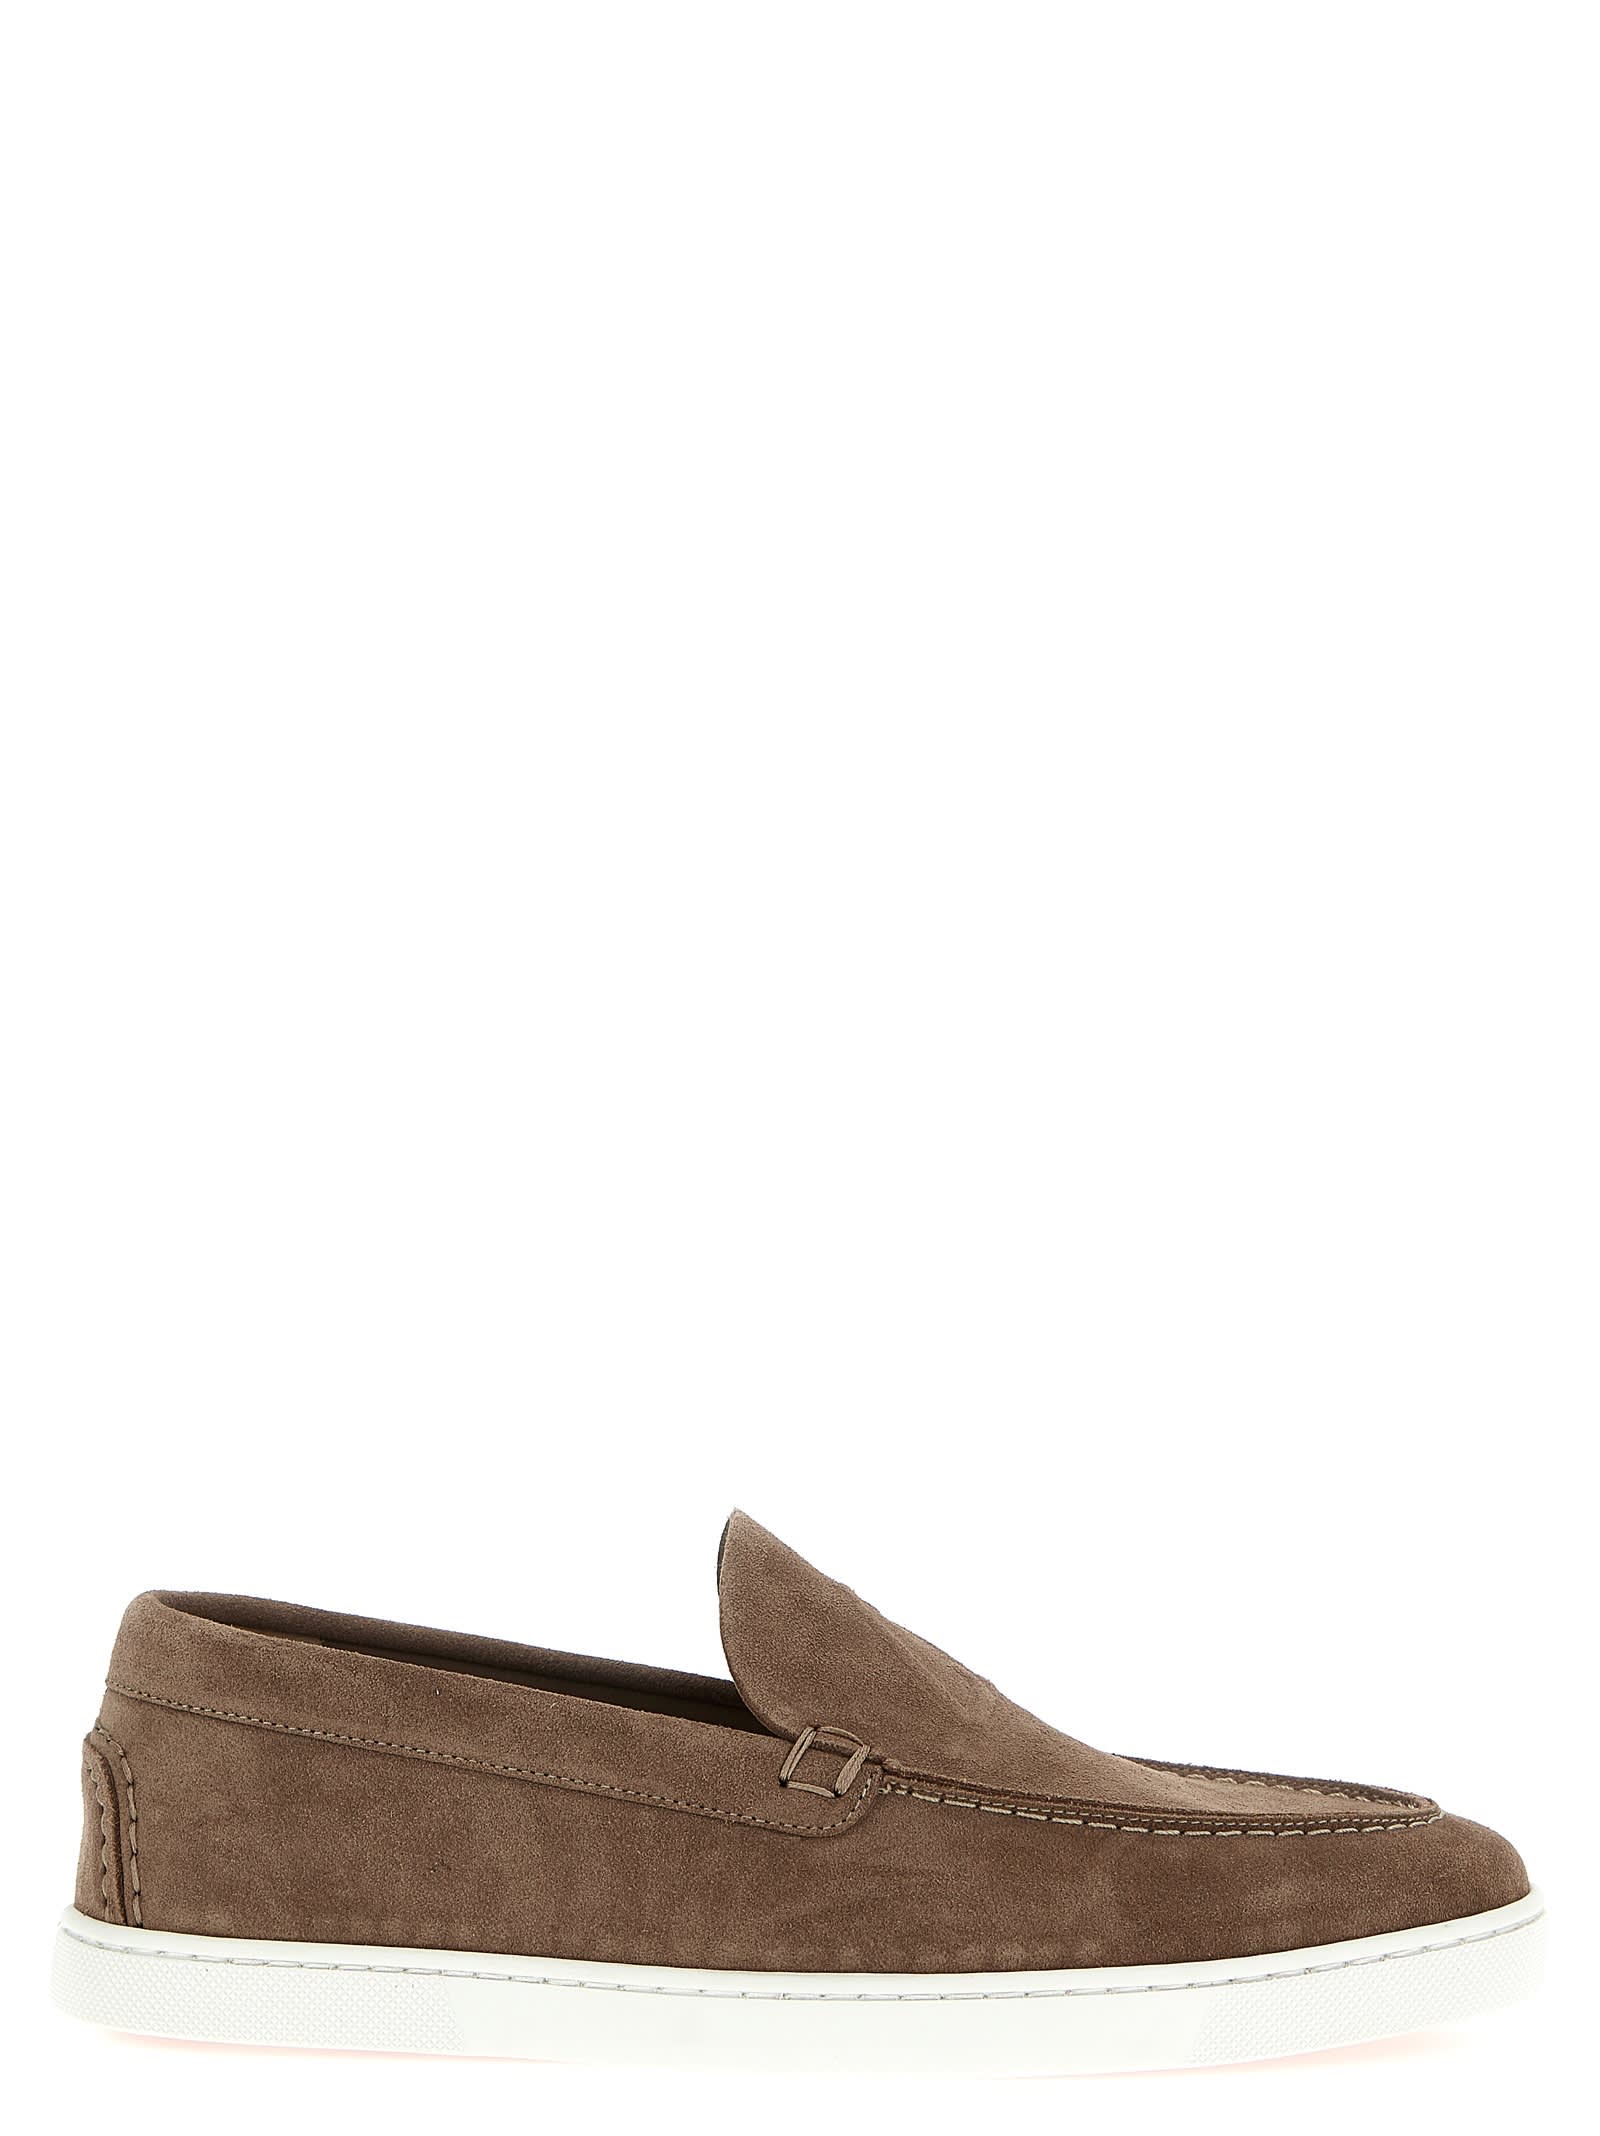 Christian Louboutin Varsiboat Flat Loafers In Brown